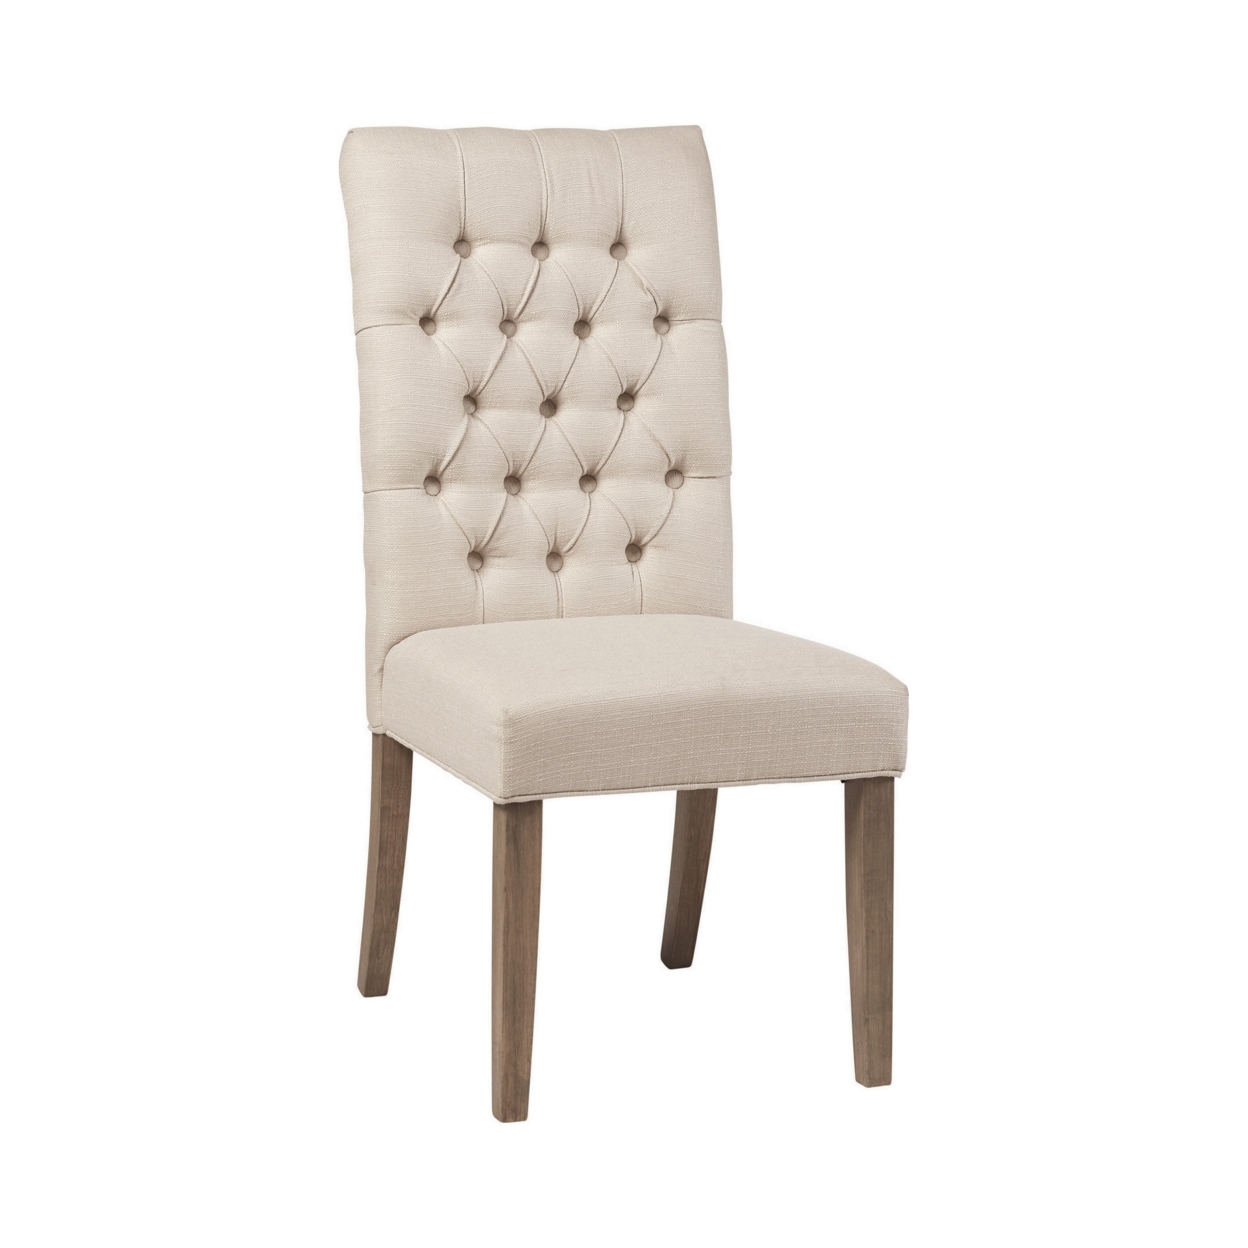 Fabric Dining Chair With Button Tufted Back, Set Of 2, Beige- Saltoro Sherpi